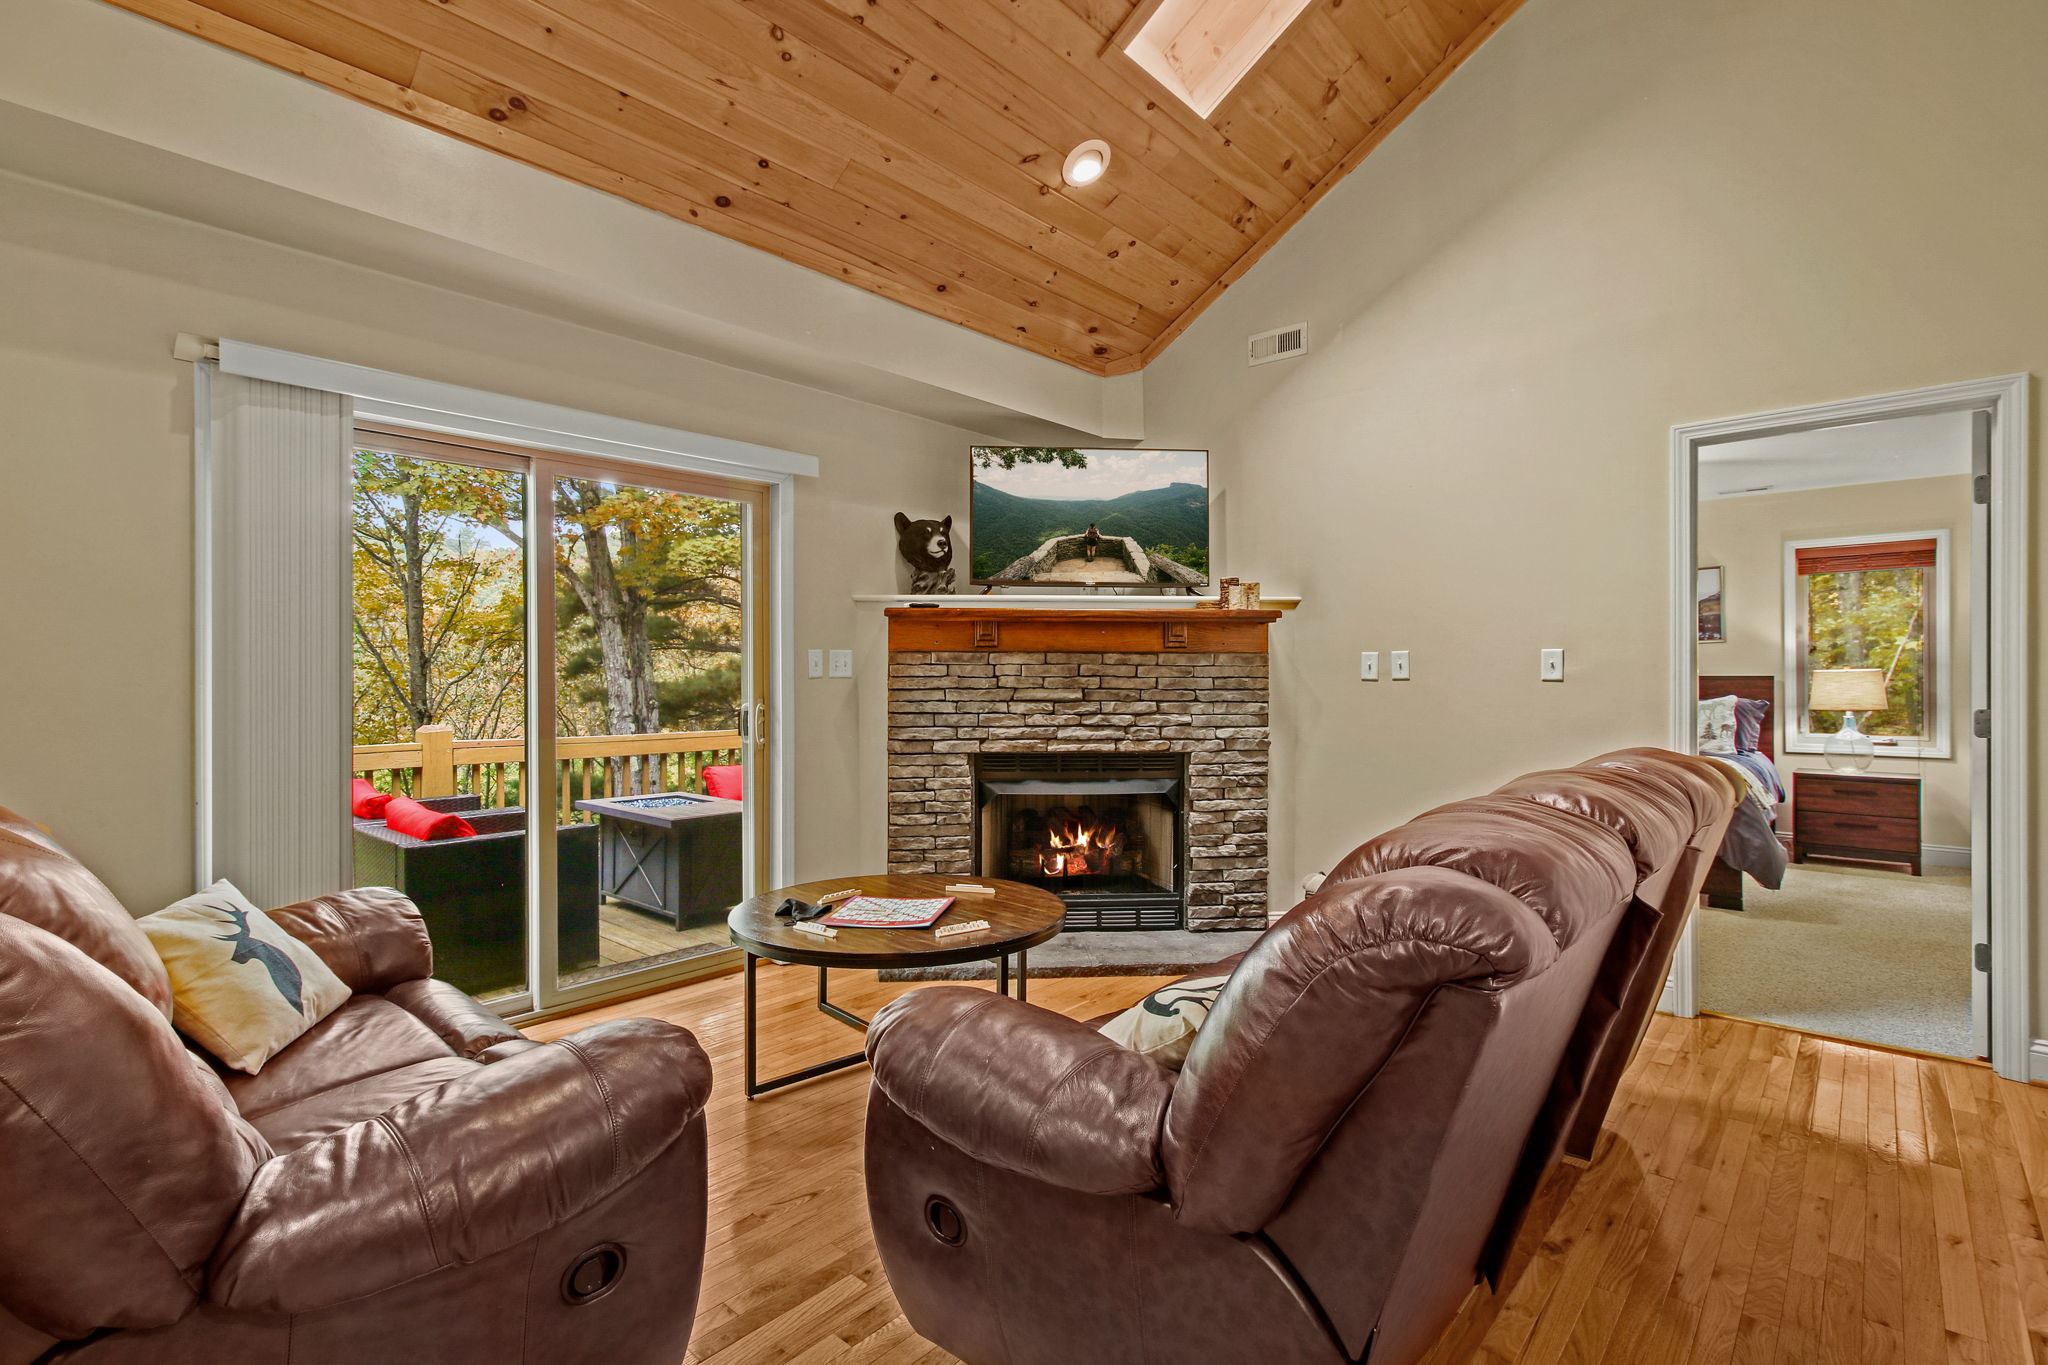 Embrace ultimate coziness in our living room – luxe couches, a warming fireplace, smart TV delights, and a personal oasis on the back deck. Your perfect retreat awaits.